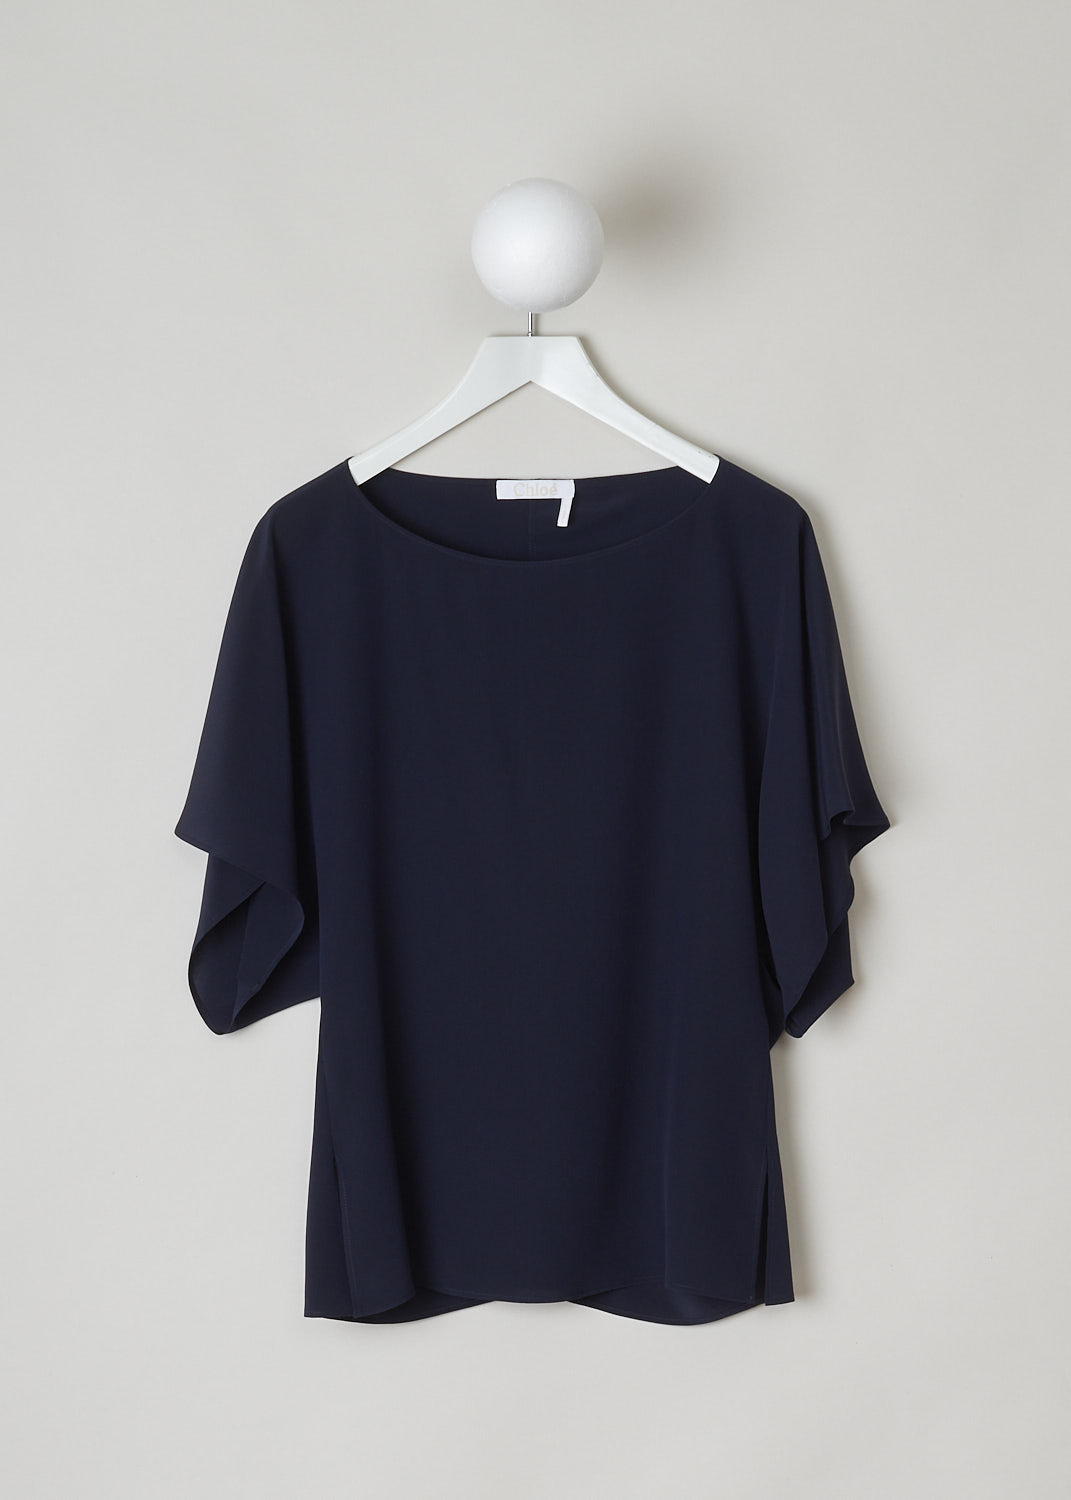 CHLOÃ‰, INK NAVY SILK TOP, CHC22UHT120044C3, Blue, Front, This ink navy blue silk top has a boat neckline and loose short cap sleeves. The top has side slits and a straight hemline. 
